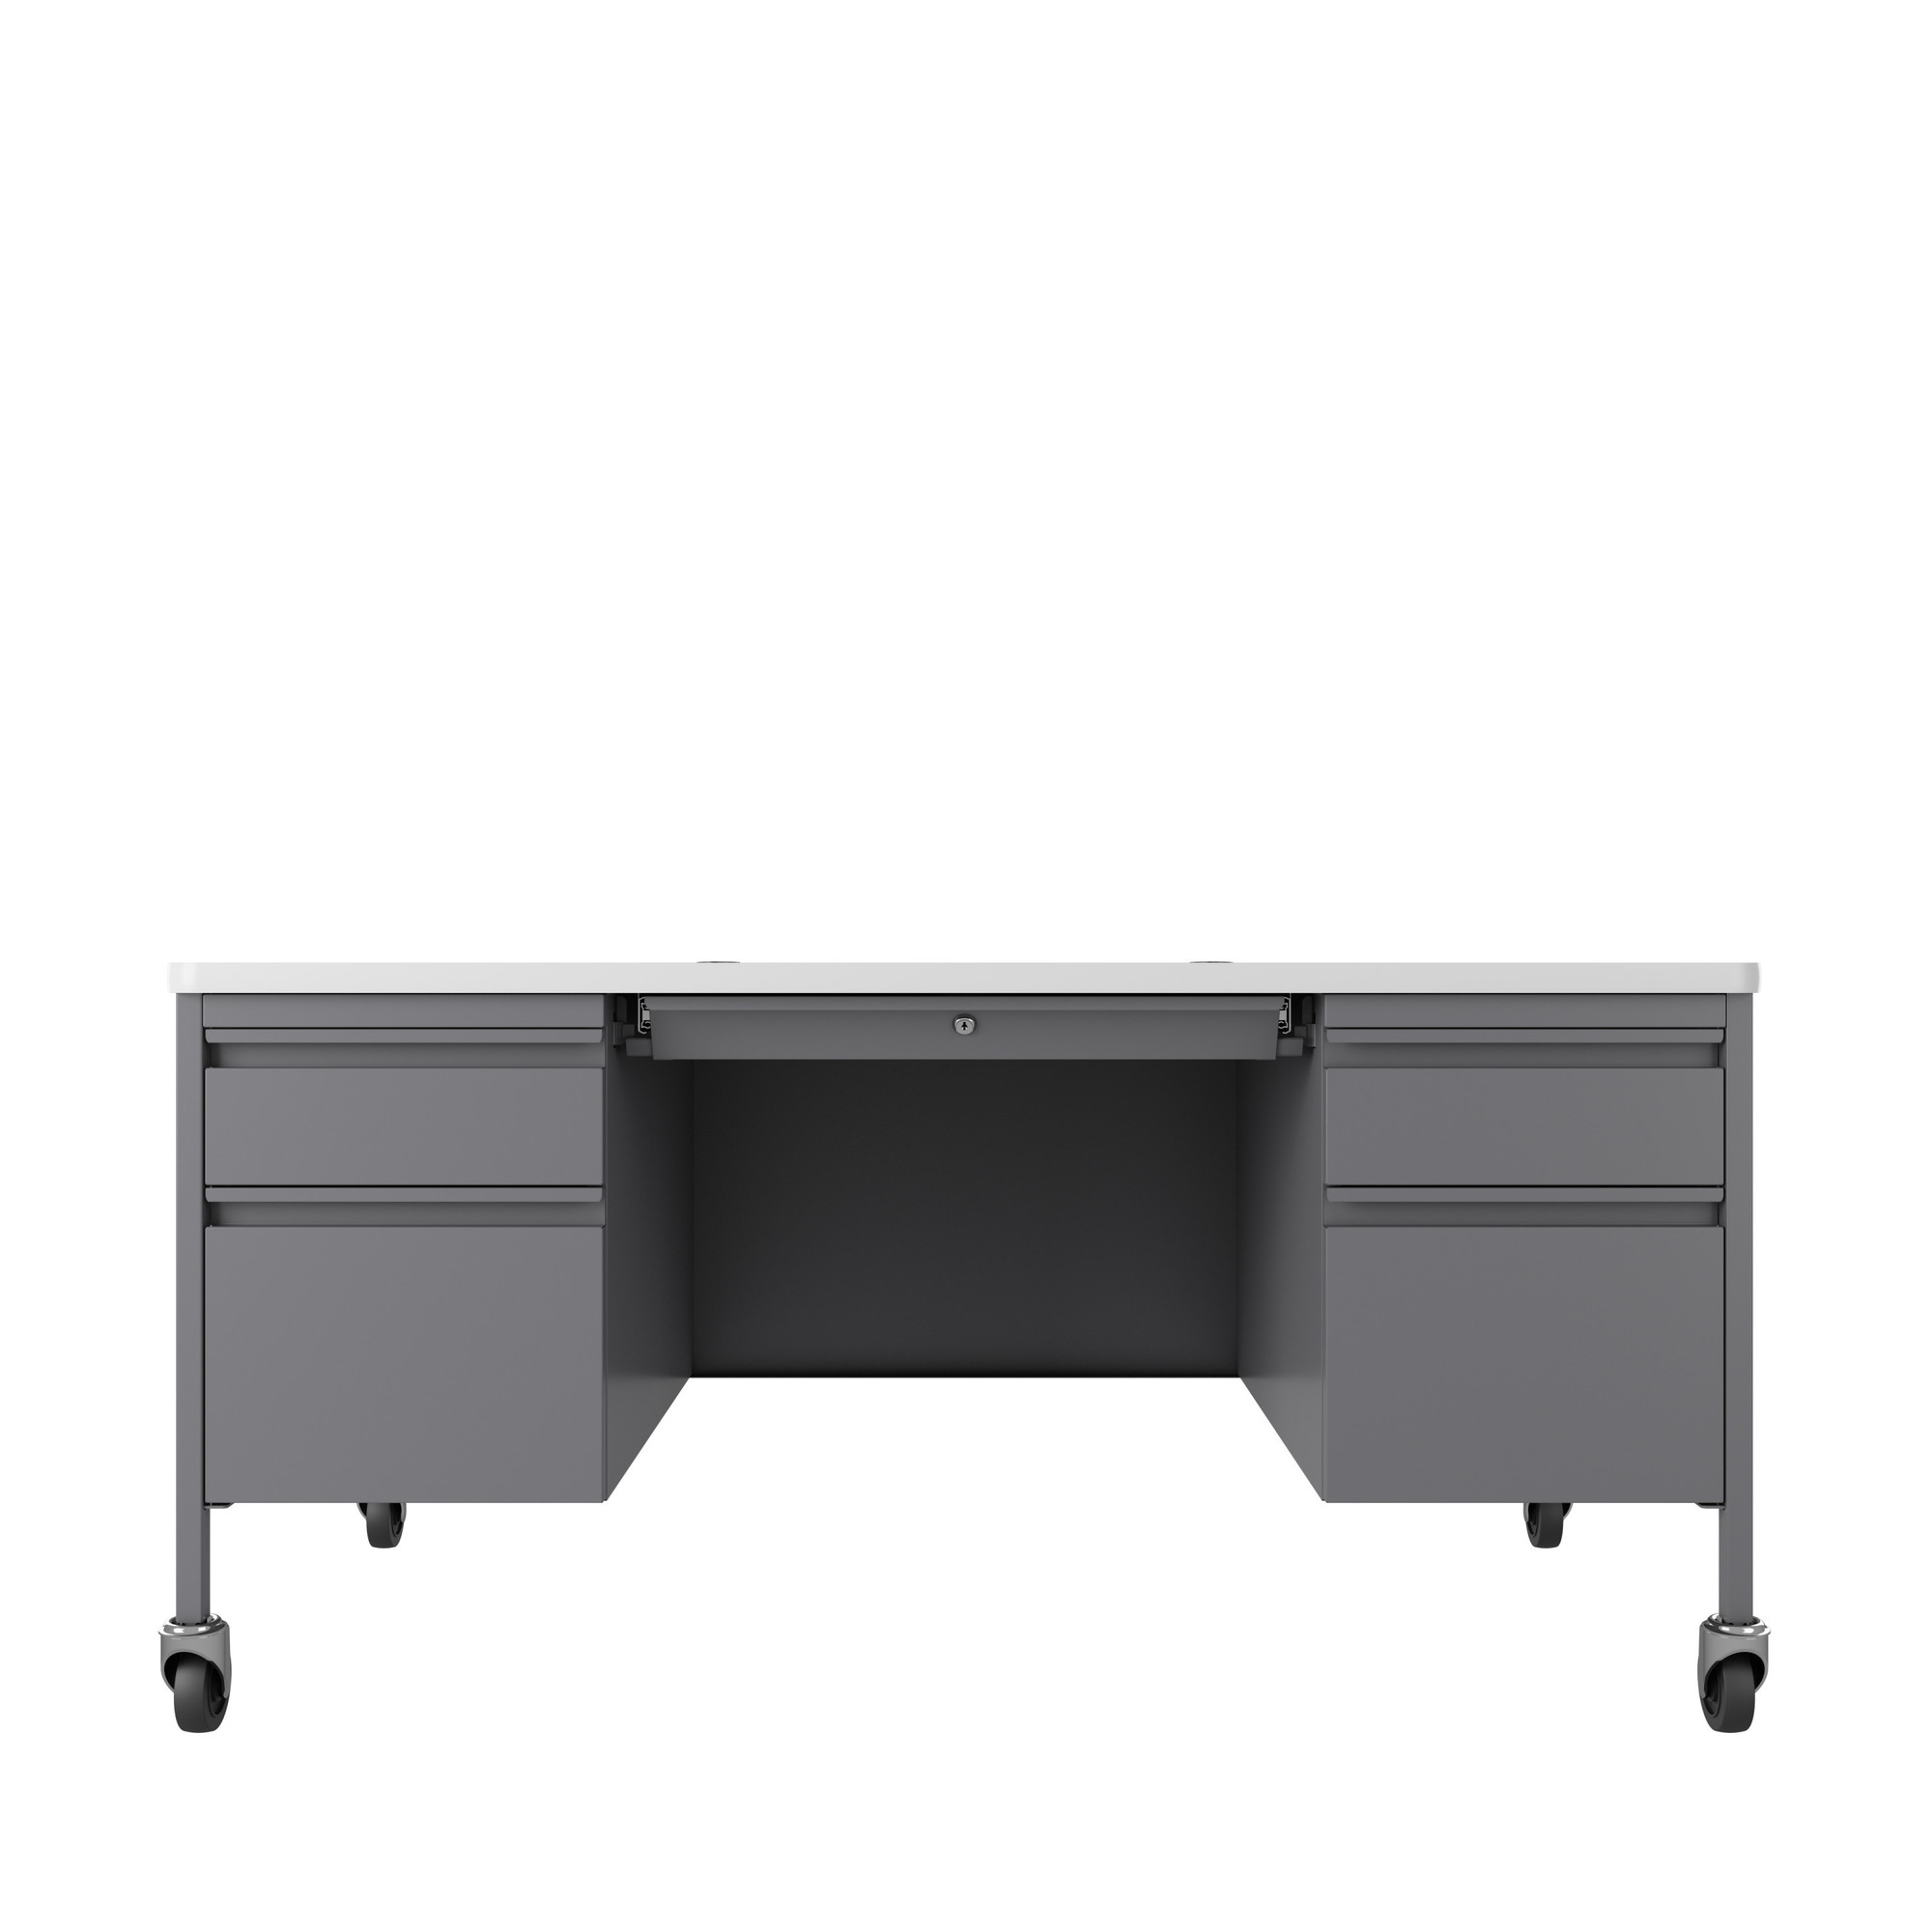 Hirsh Industries, Double Ped File Desk w/ Rounded Corner T-Mold Top, Width 60 in, Height 29.5 in, Depth 30 in, Model 22659